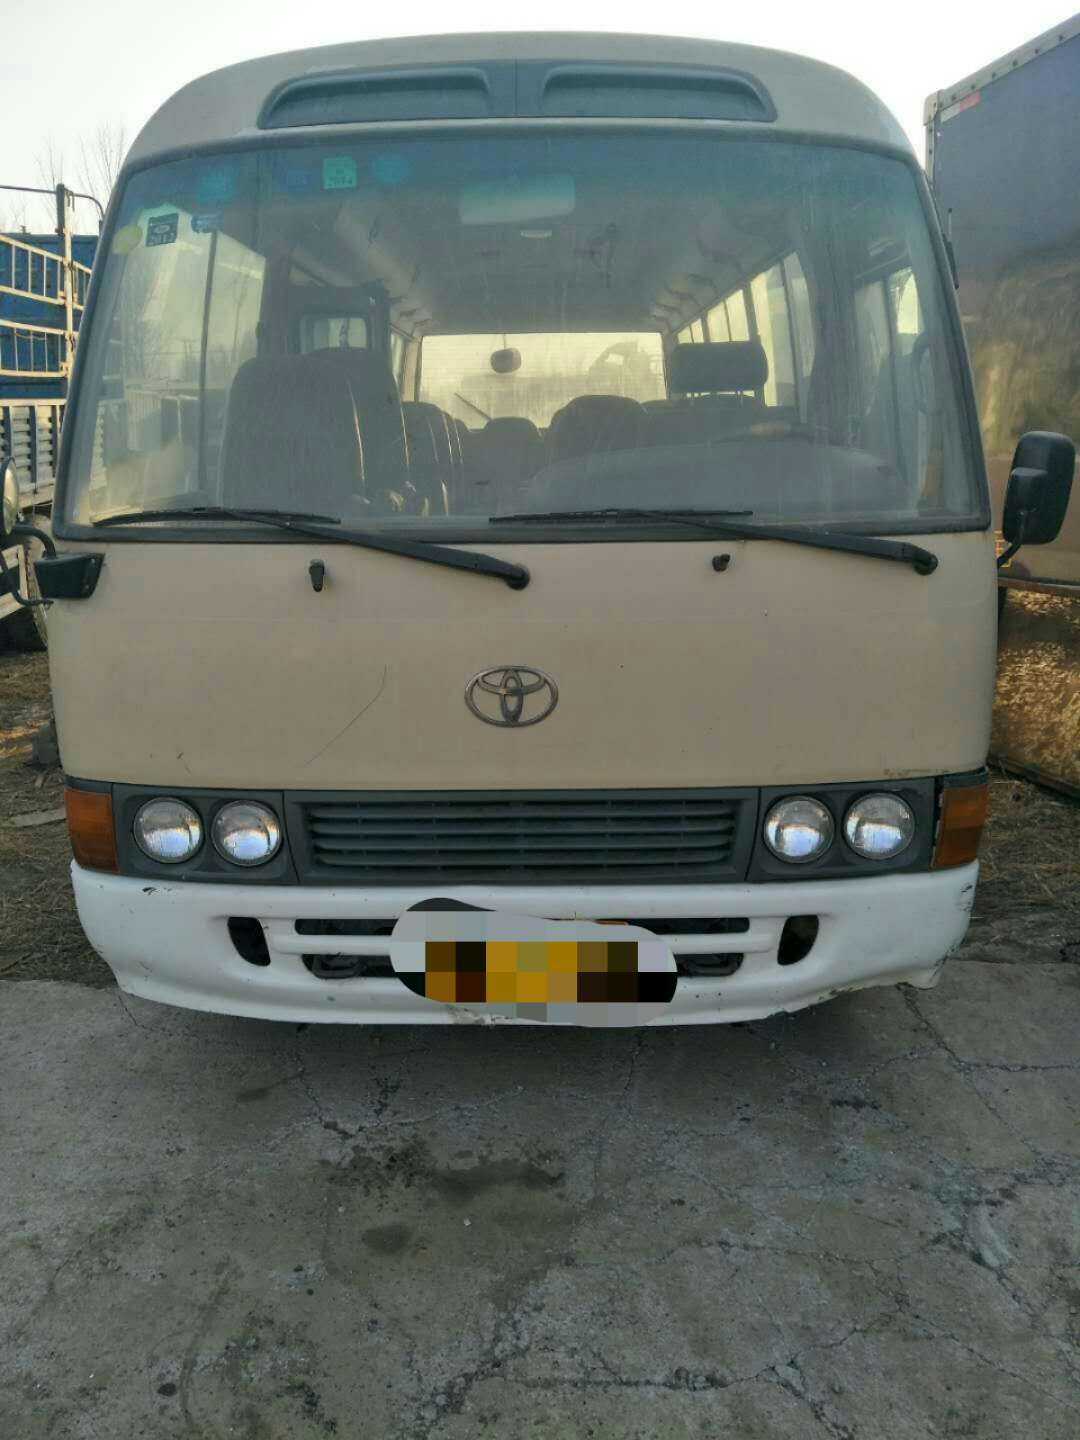 Used Toyota Coaster 15seats buses from Shanghai